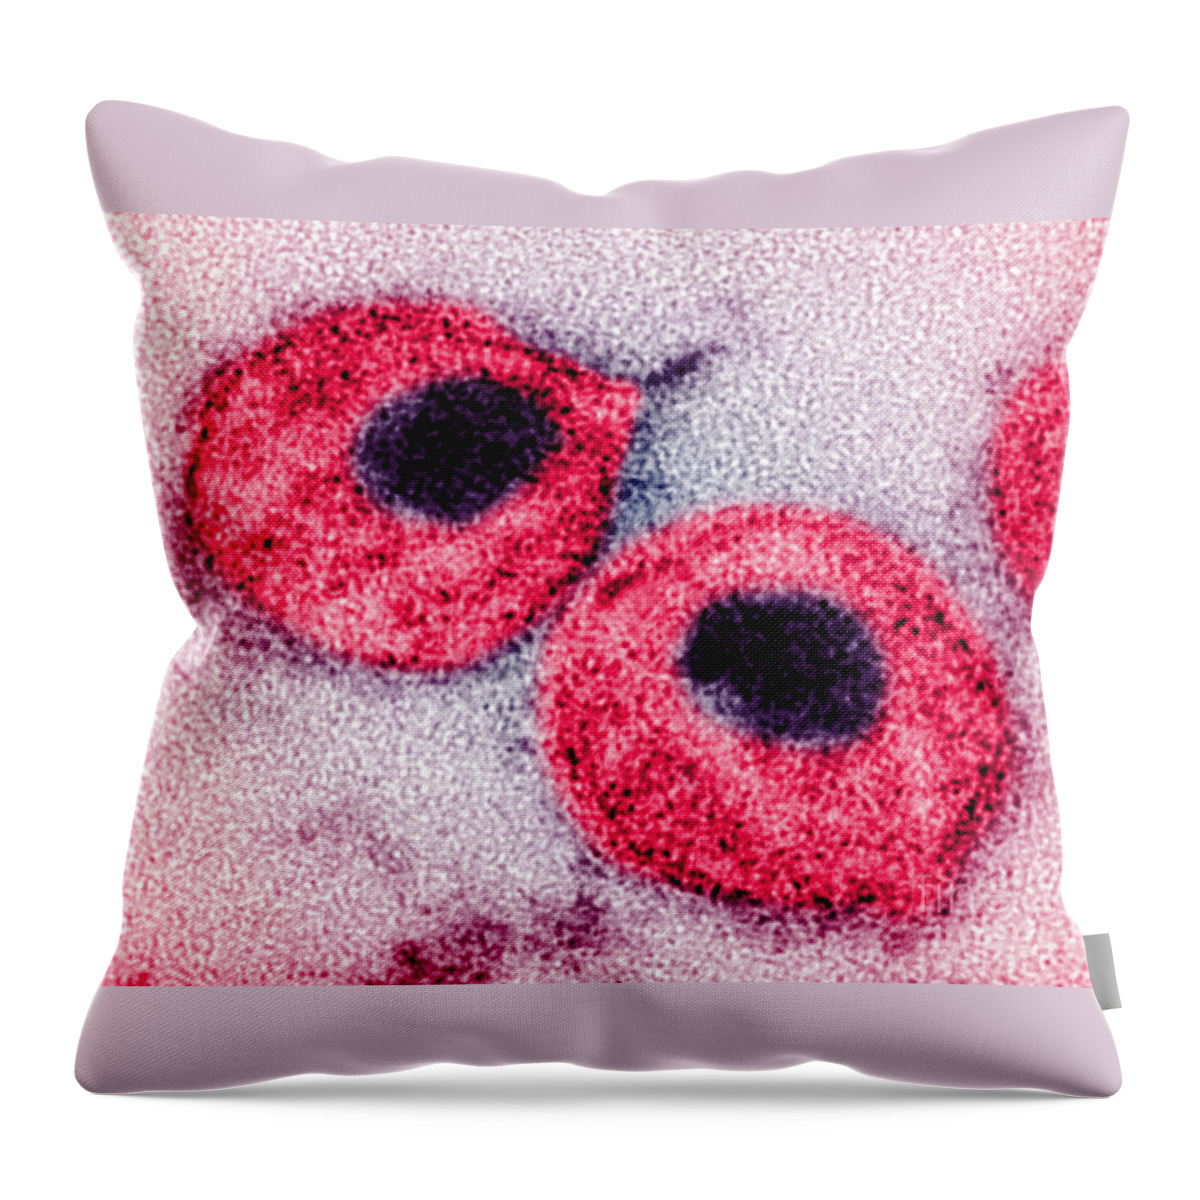 Aids Throw Pillow featuring the photograph Hiv #3 by Science Source